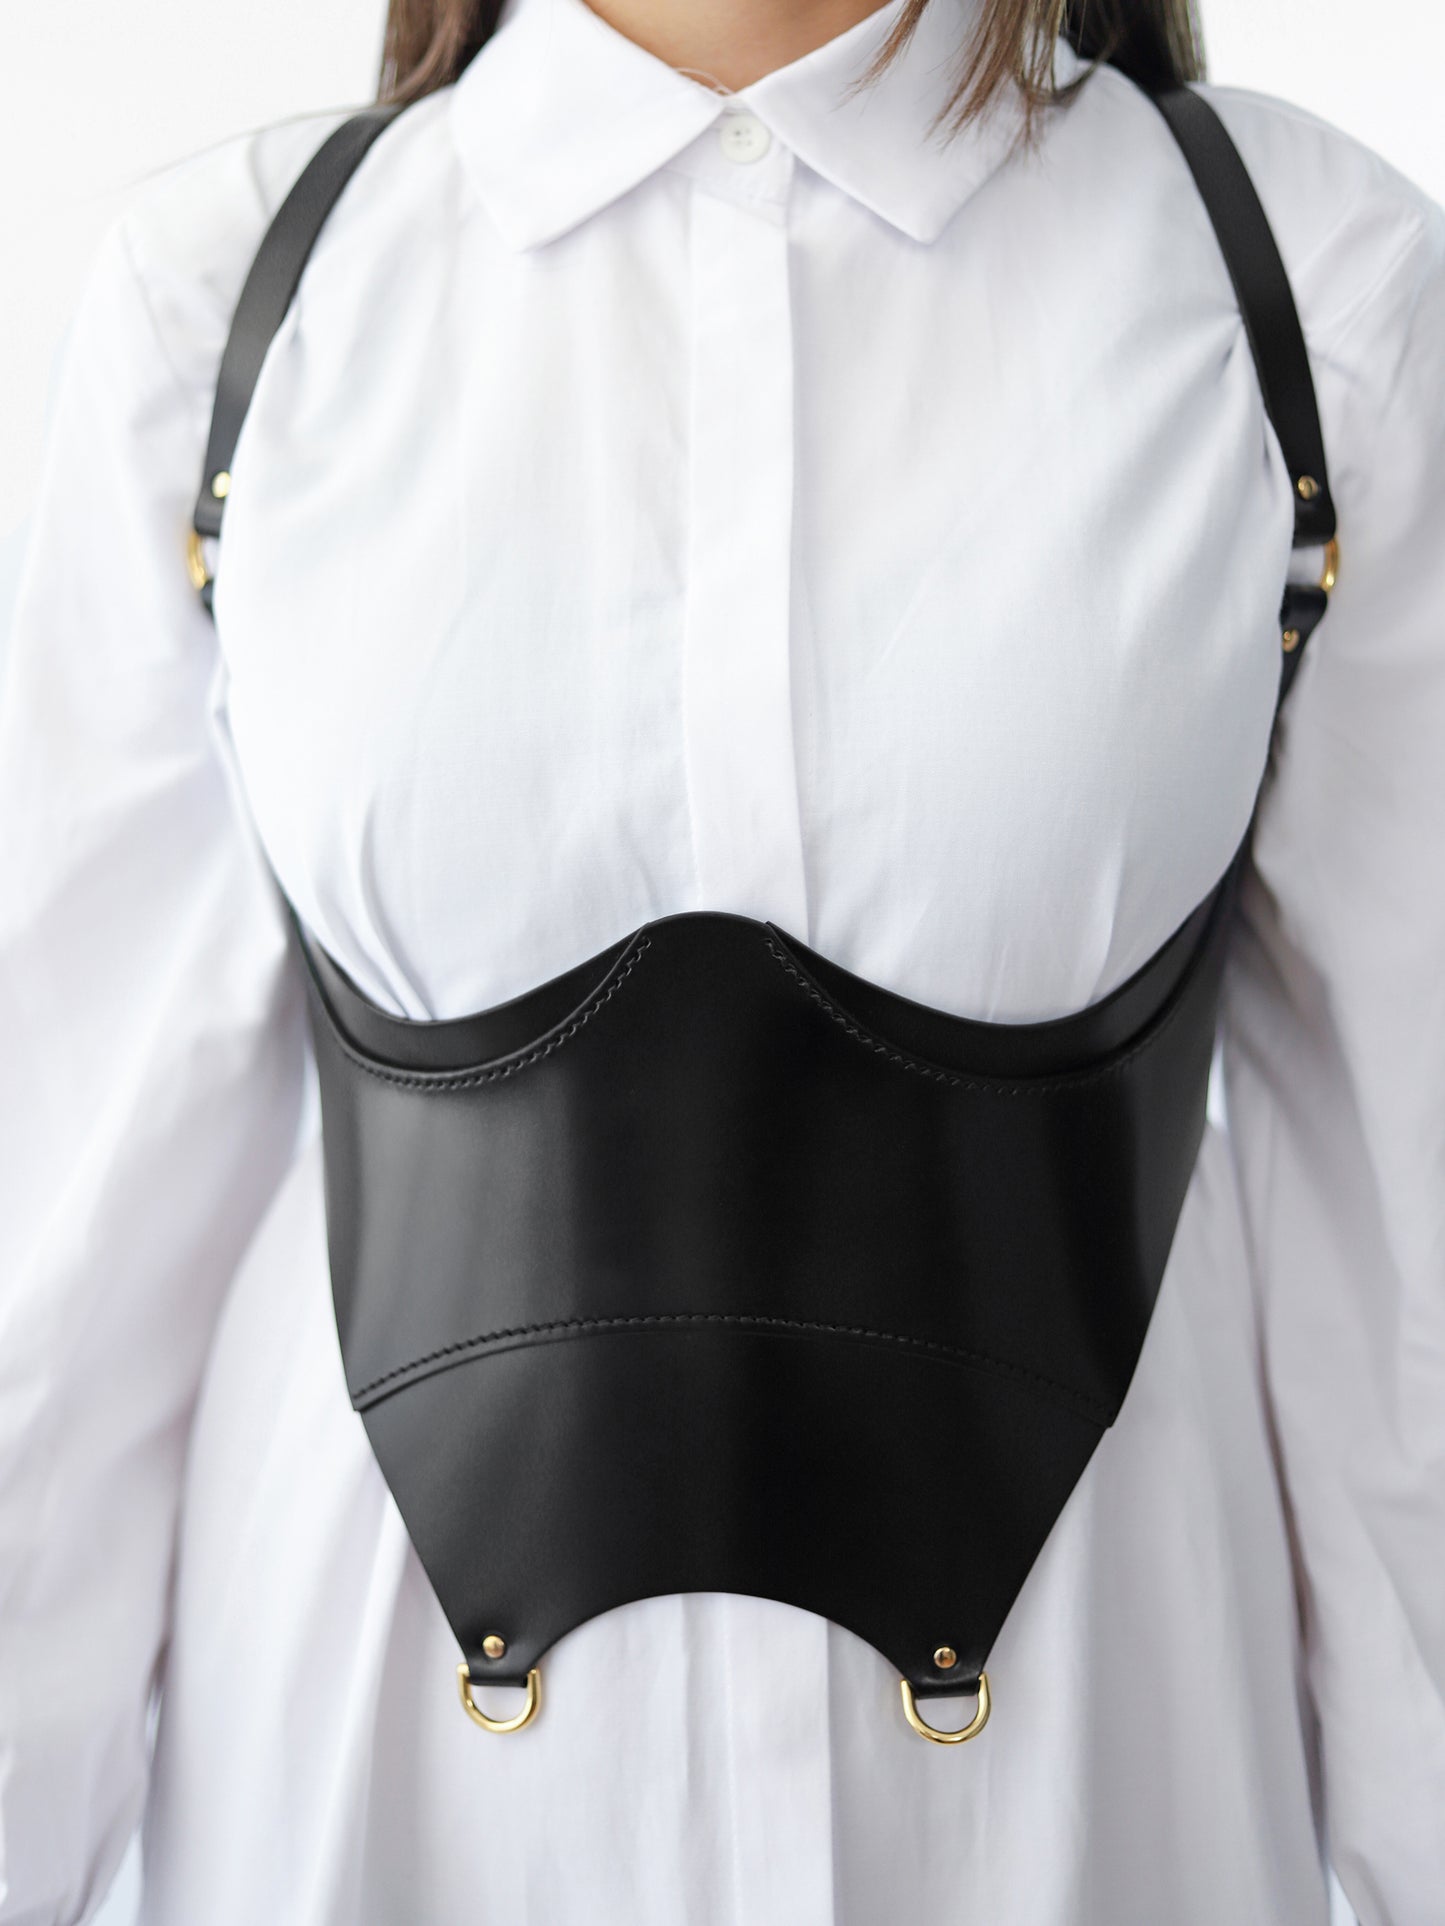 Detailed view of black underbust corset harness.